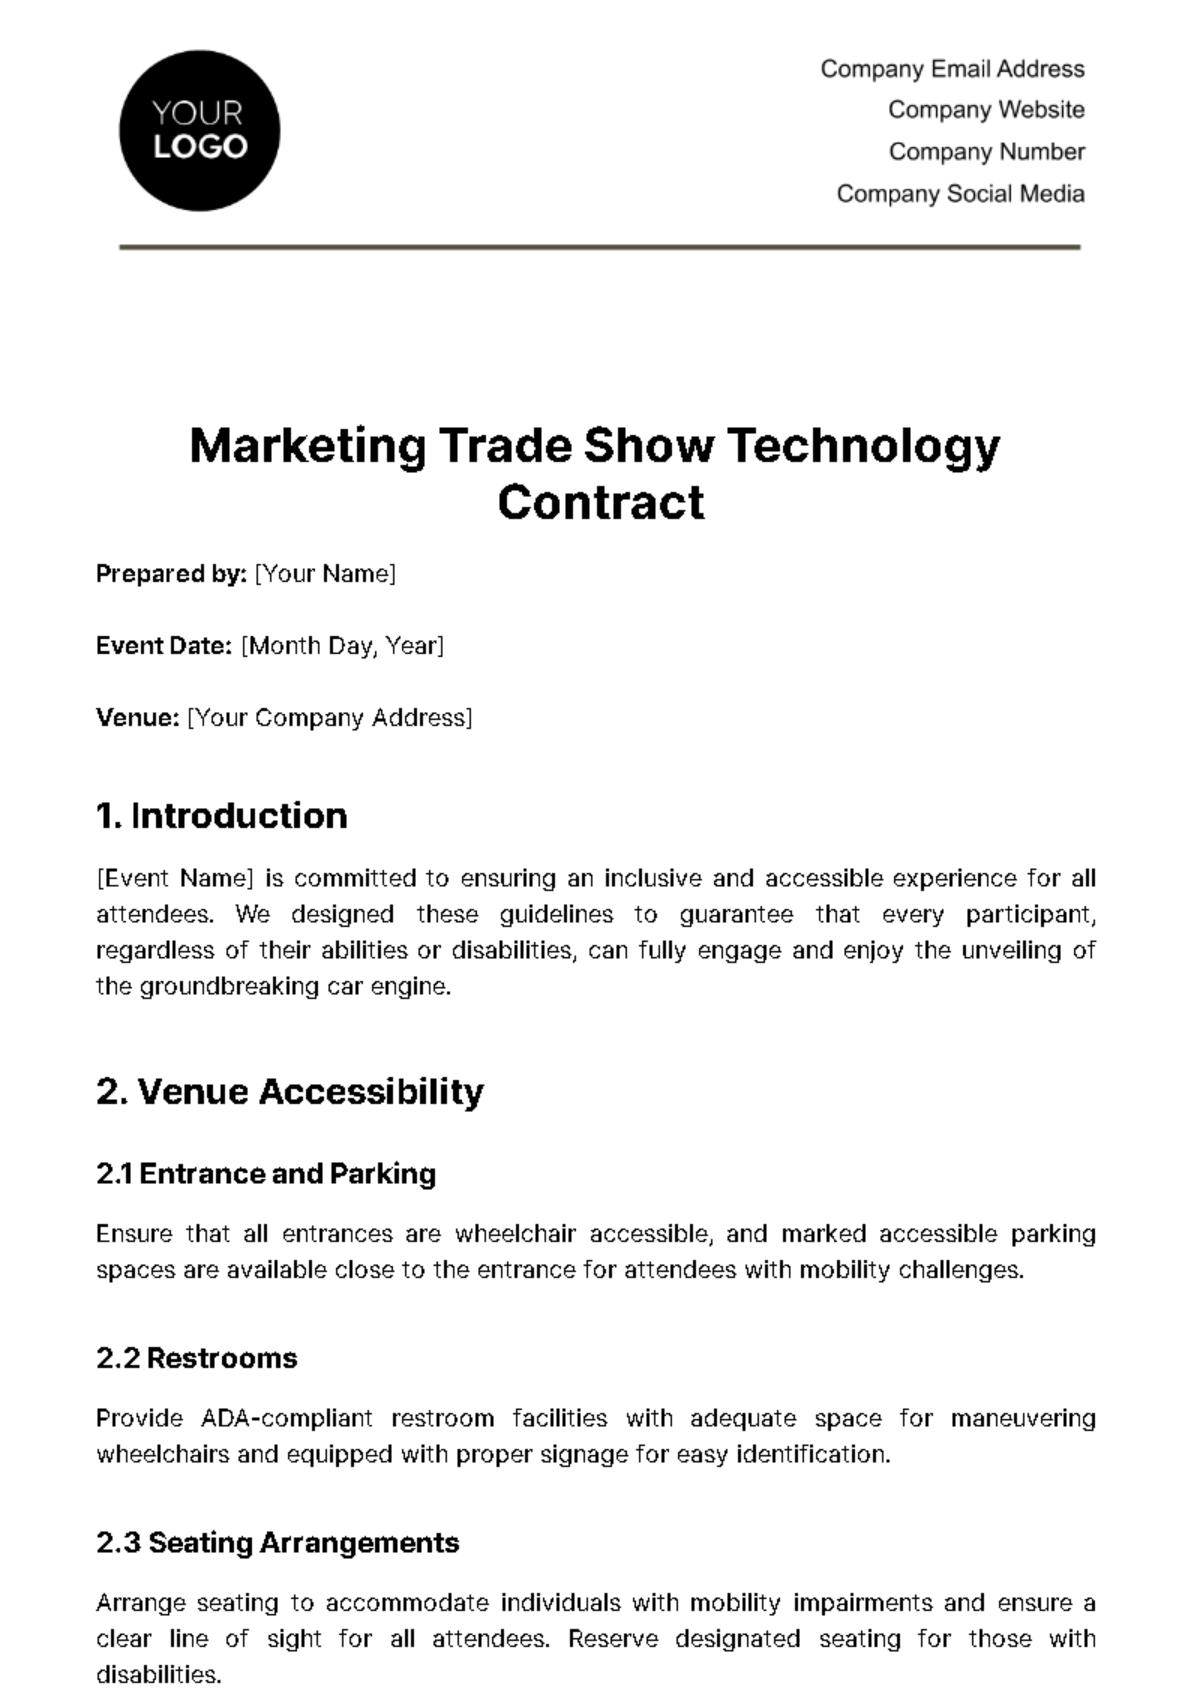 Free Marketing Trade Show Technology Contract Template